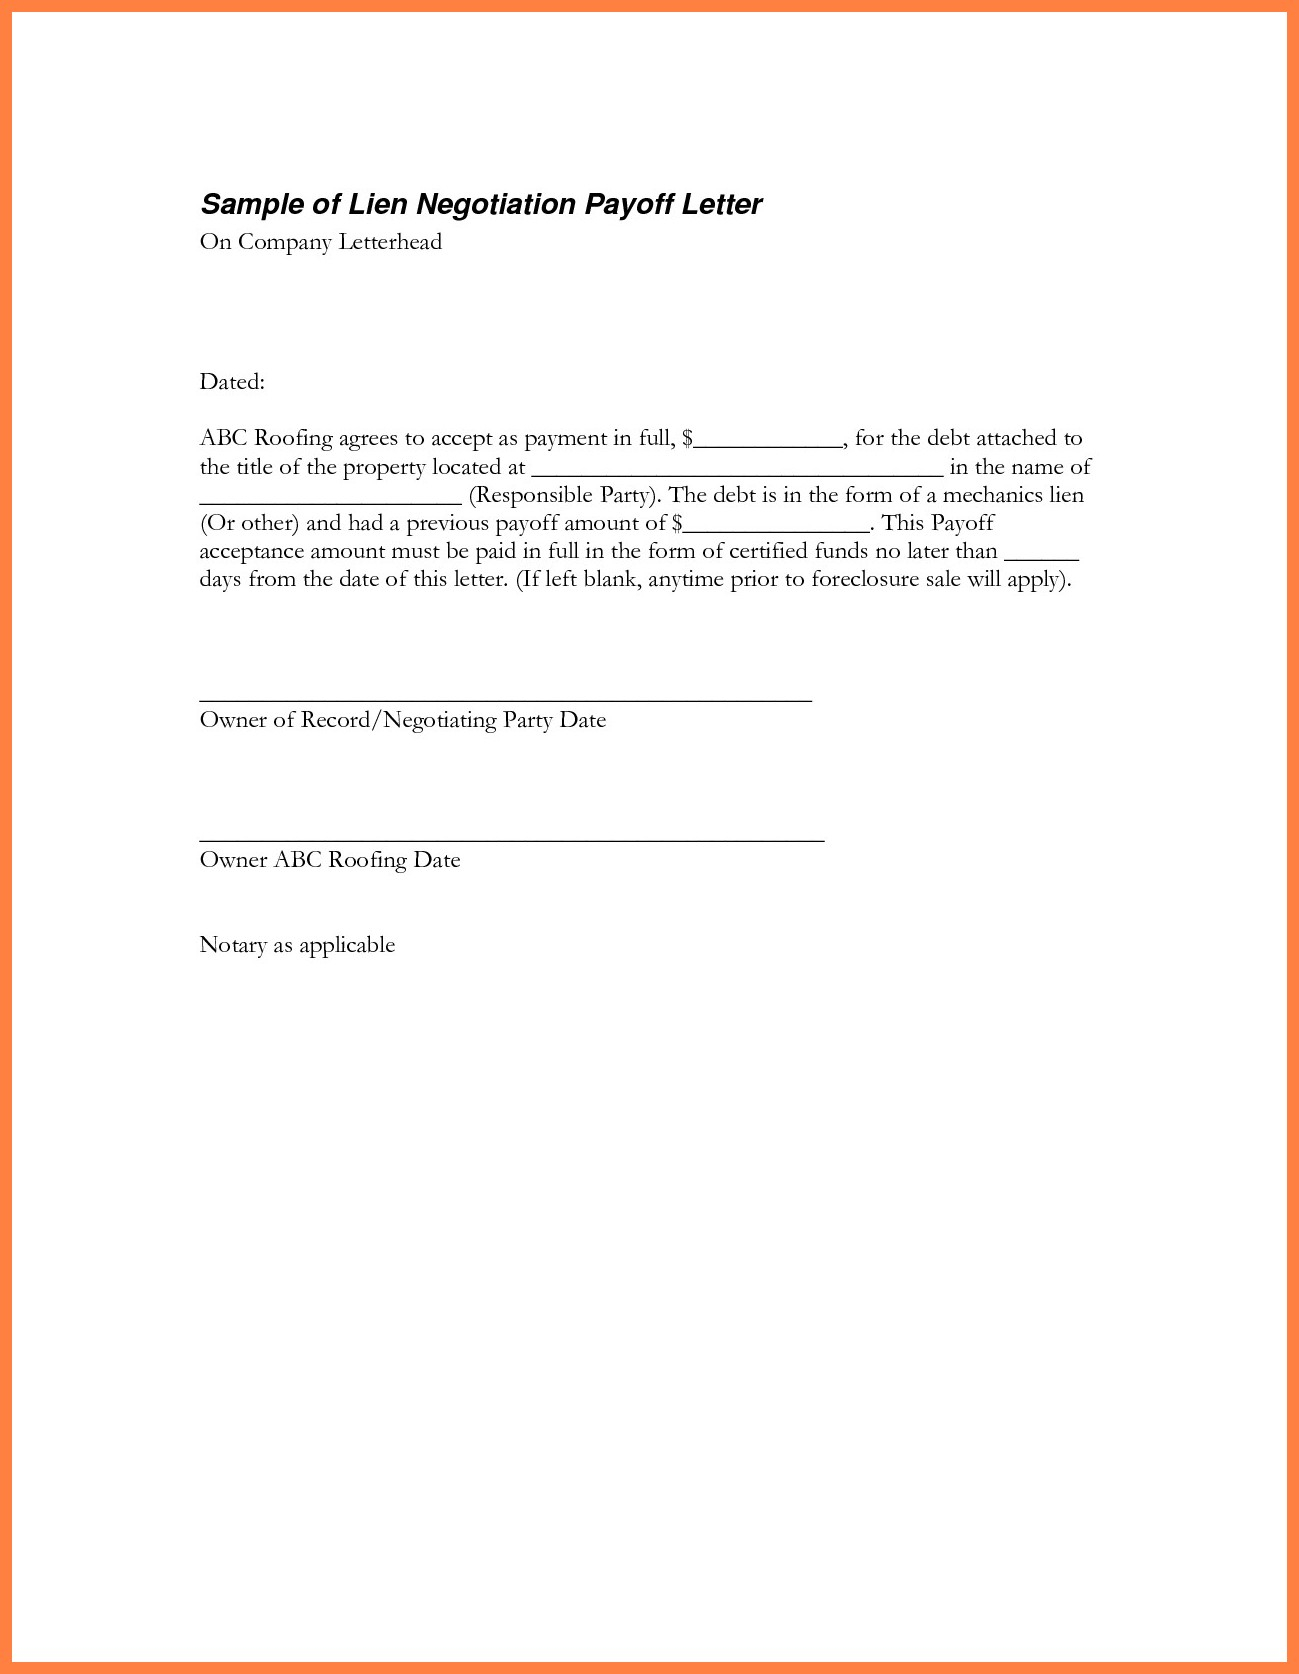 Mortgage Loan Payoff Letter Template - Inspiration 9 Best Sample Loan Payoff Letter form Loan Payoff